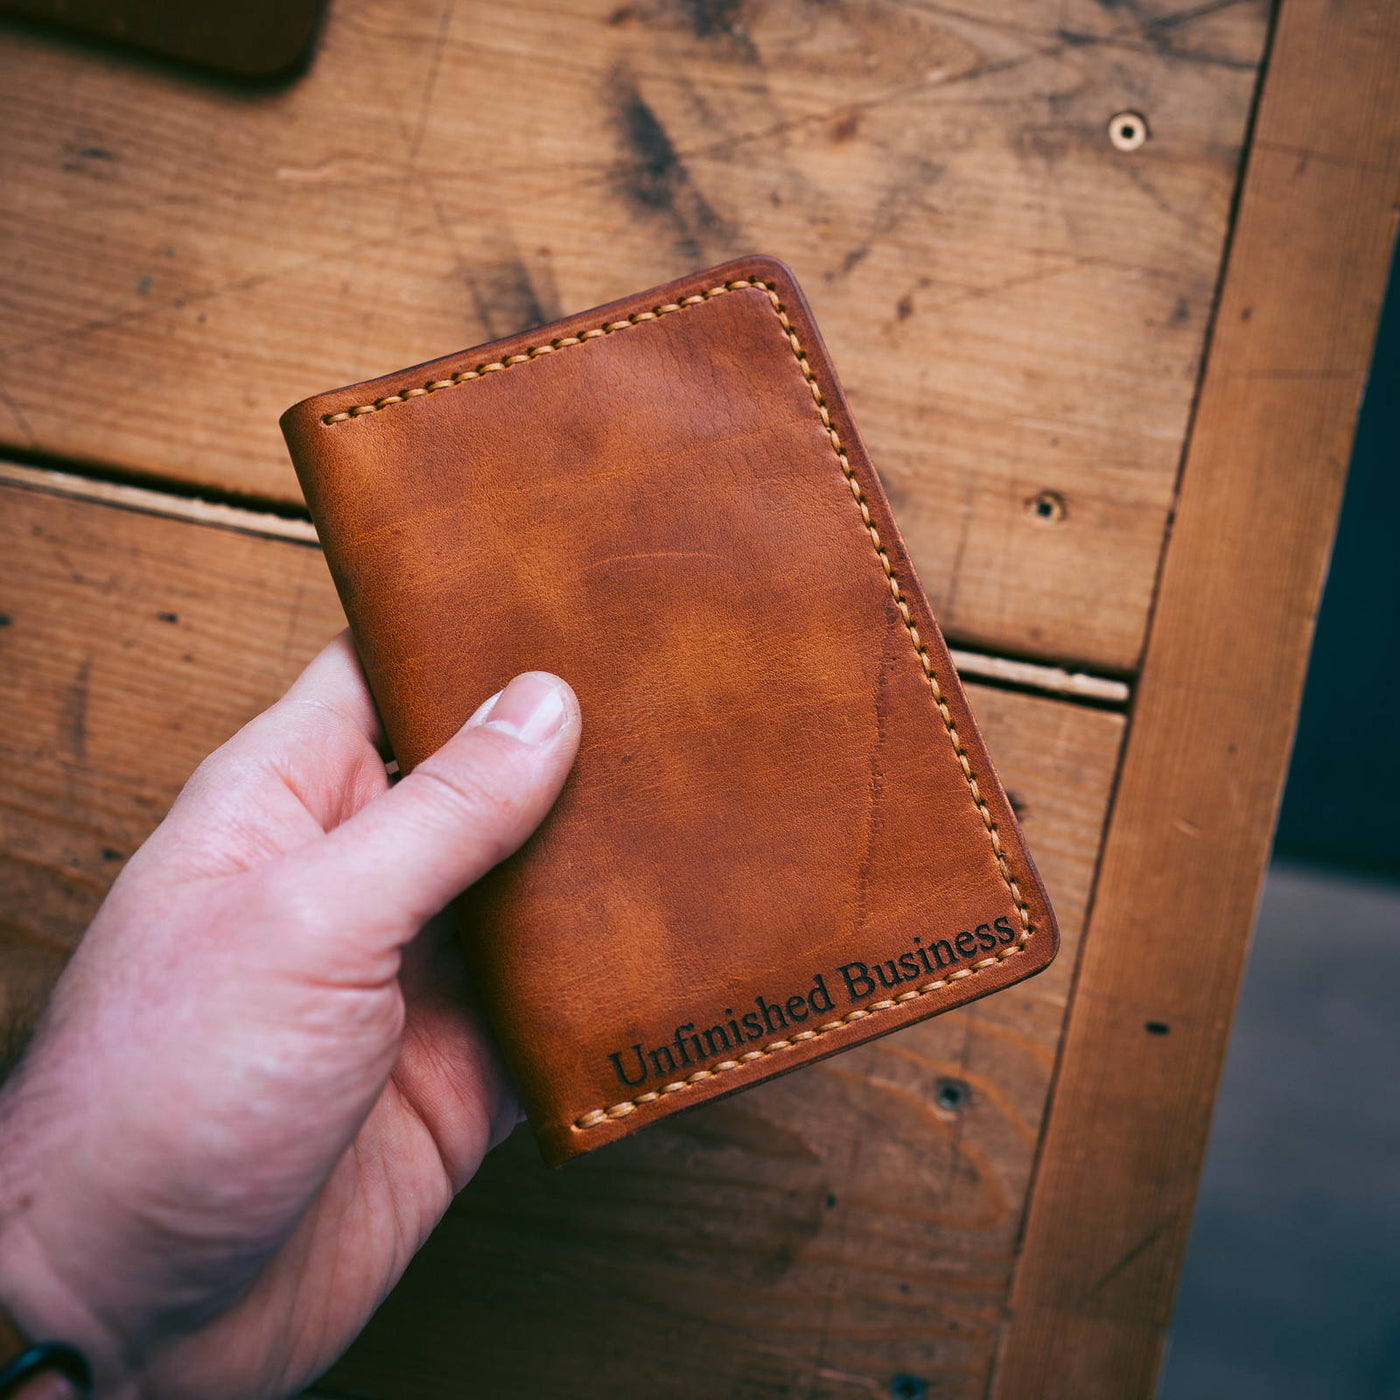 Engraving on Leather Wallet